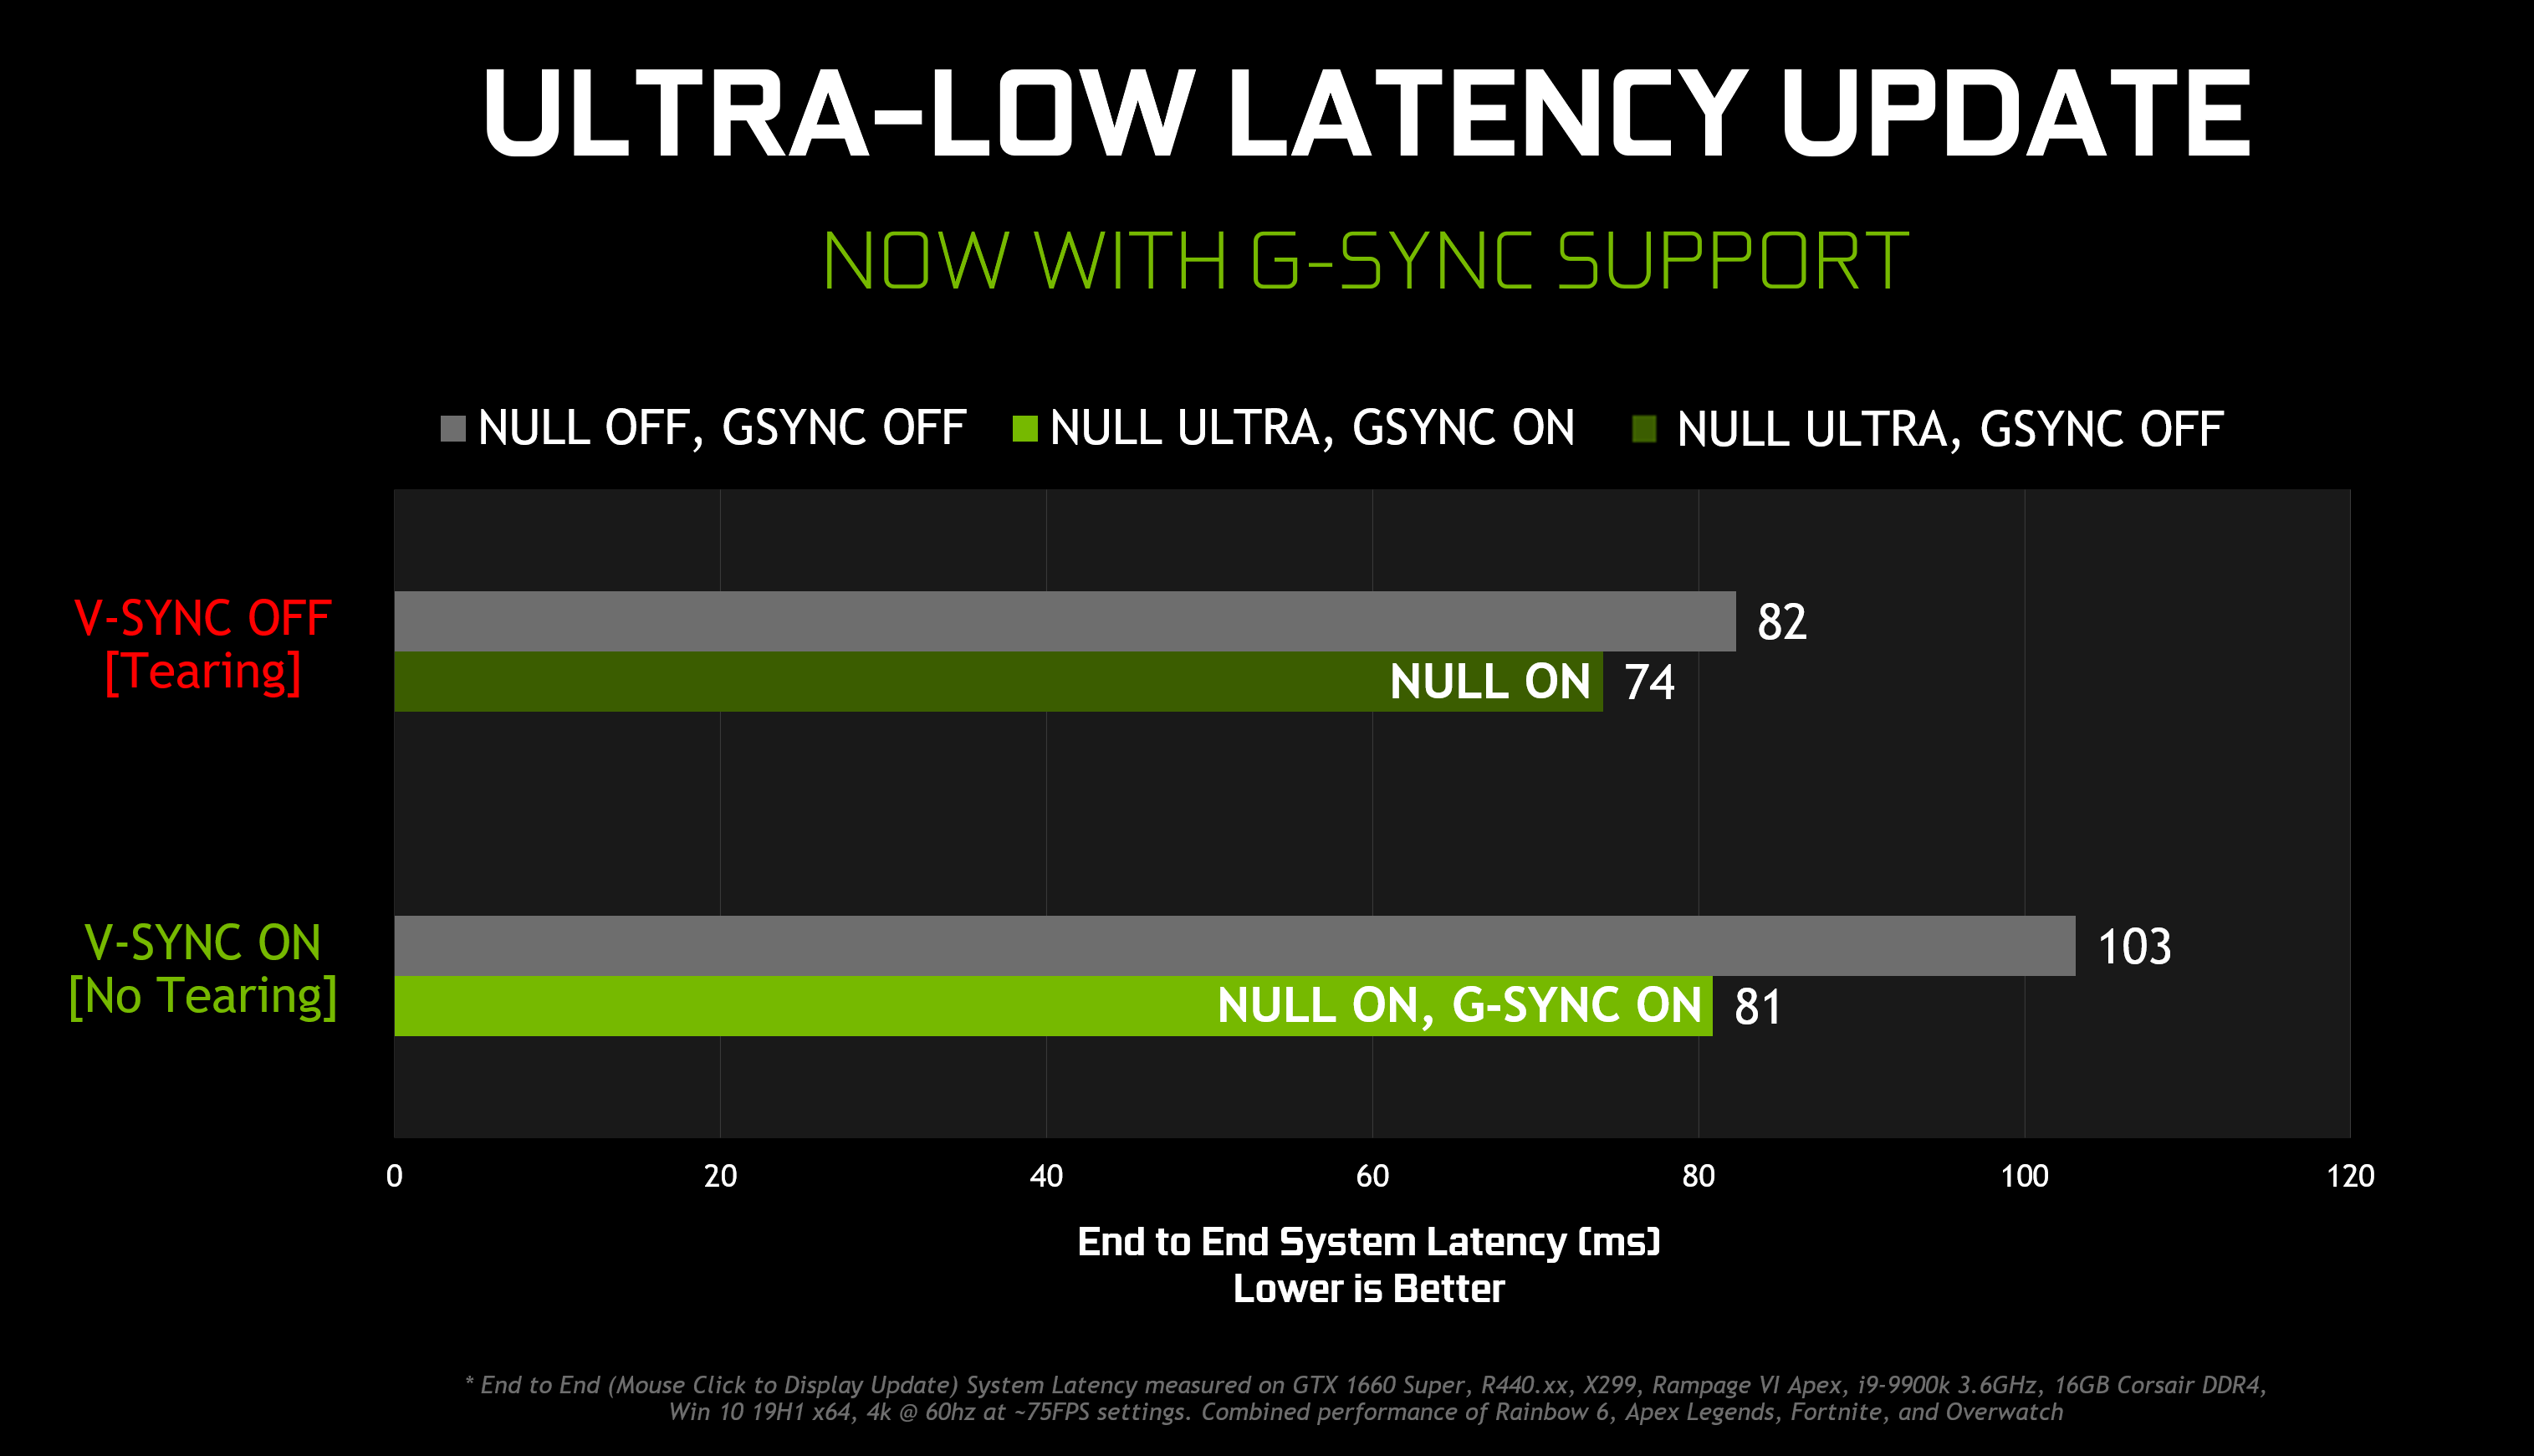 New Game Ready Driver Released Includes Support For Geforce Gtx 1660 Super Adds Reshade Filters To Geforce Experience Image Sharpening To Nvidia Control Panel G Sync To Ultra Low Latency Rendering And Support For